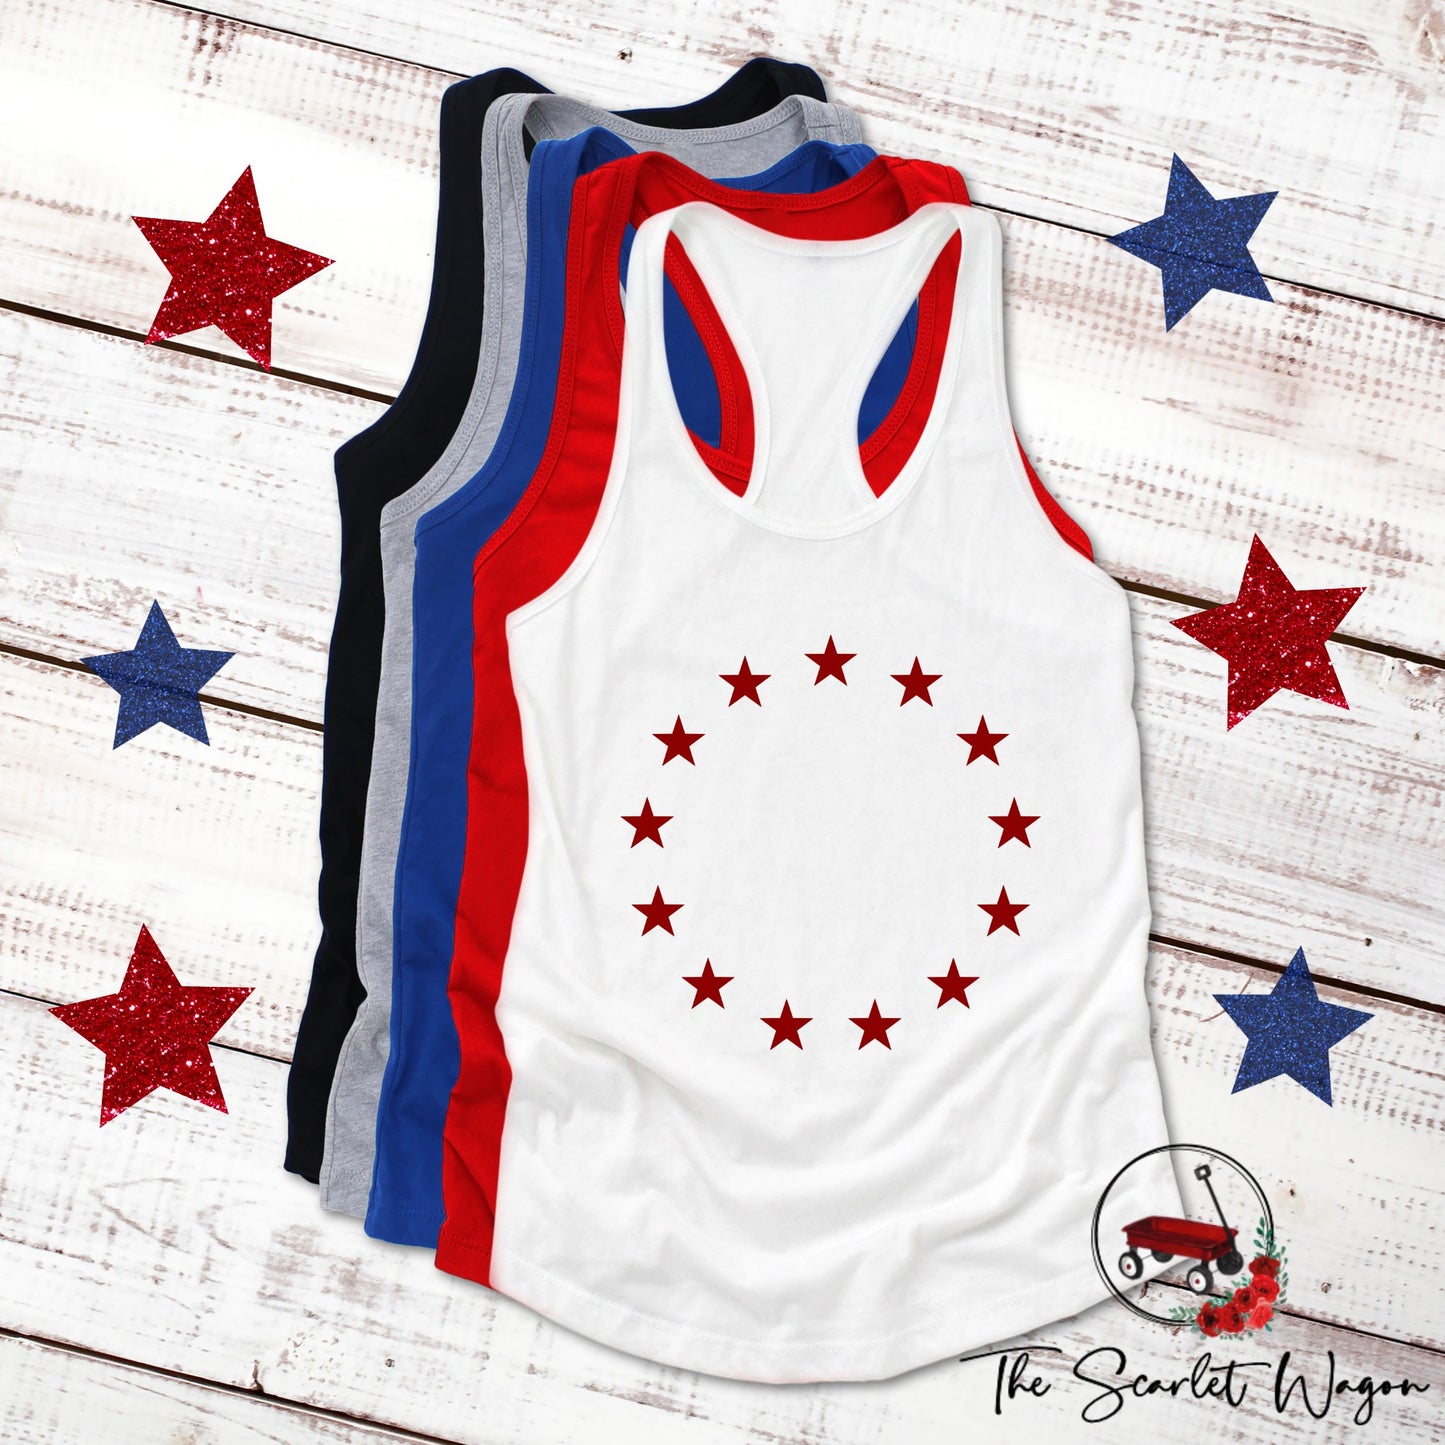 Betsy Ross Flag Women's Racerback Tank Patriotic Shirt The Scarlet Wagon Boutique 